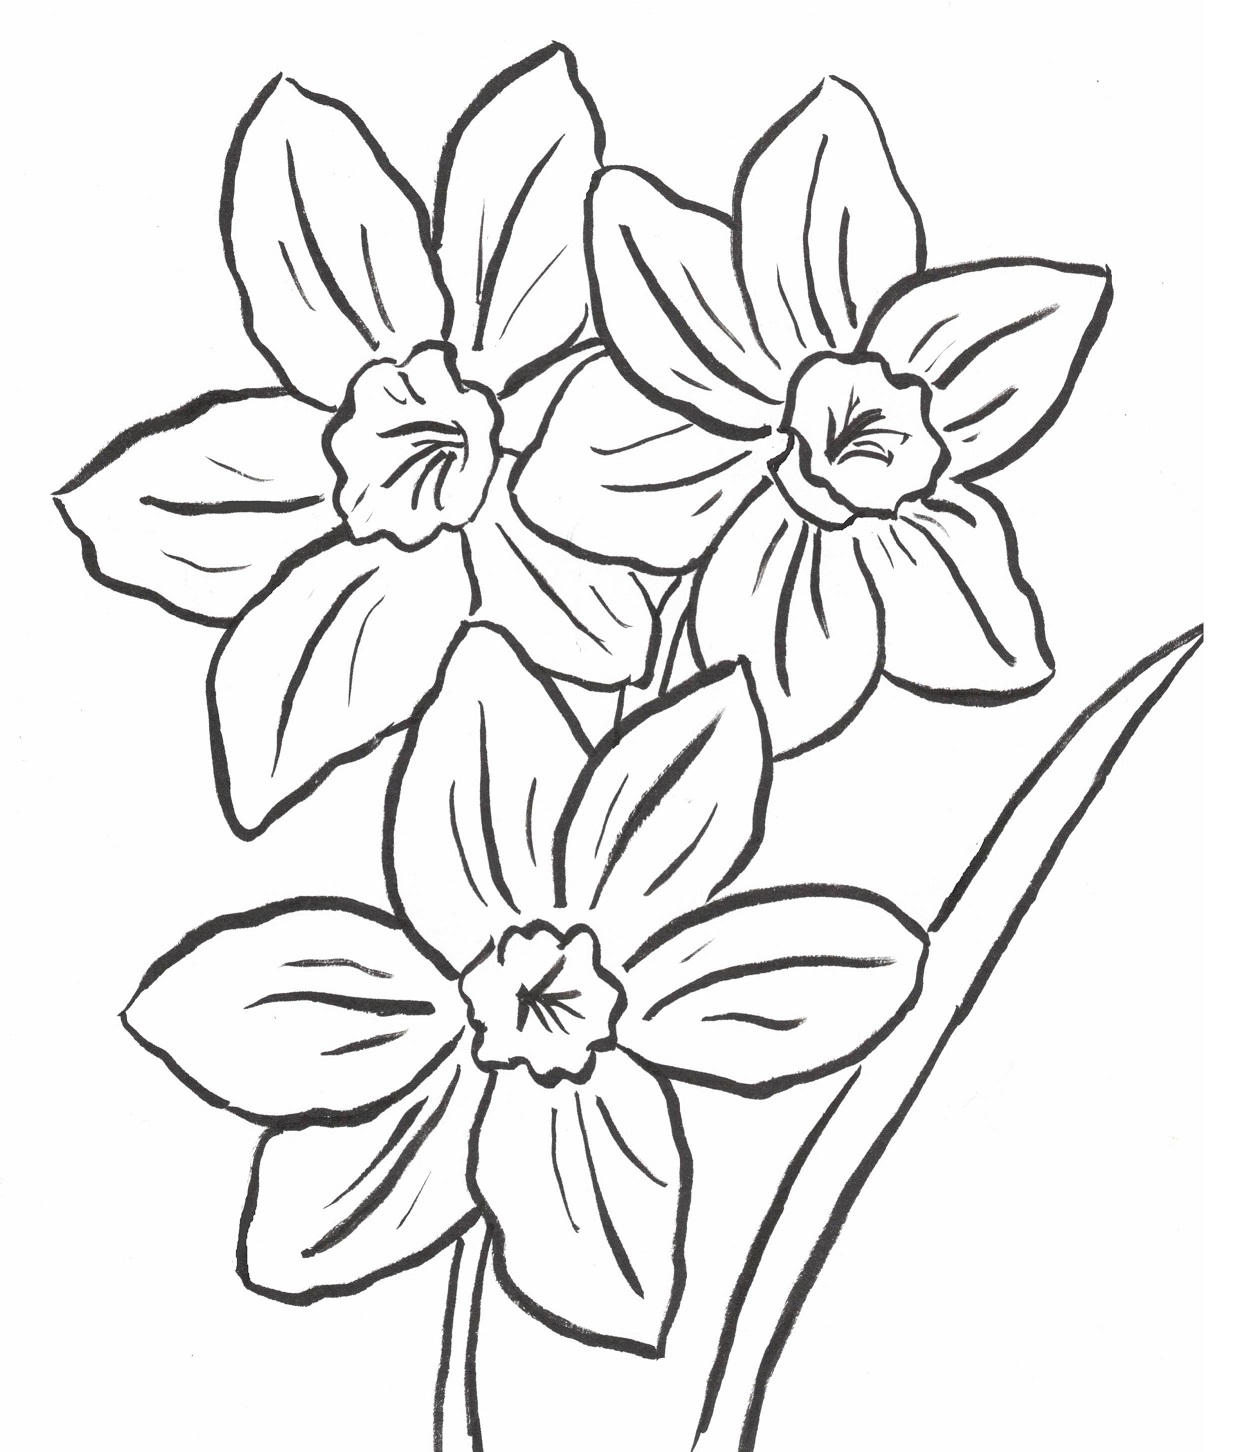 Daffodil Coloring Page - Art Starts